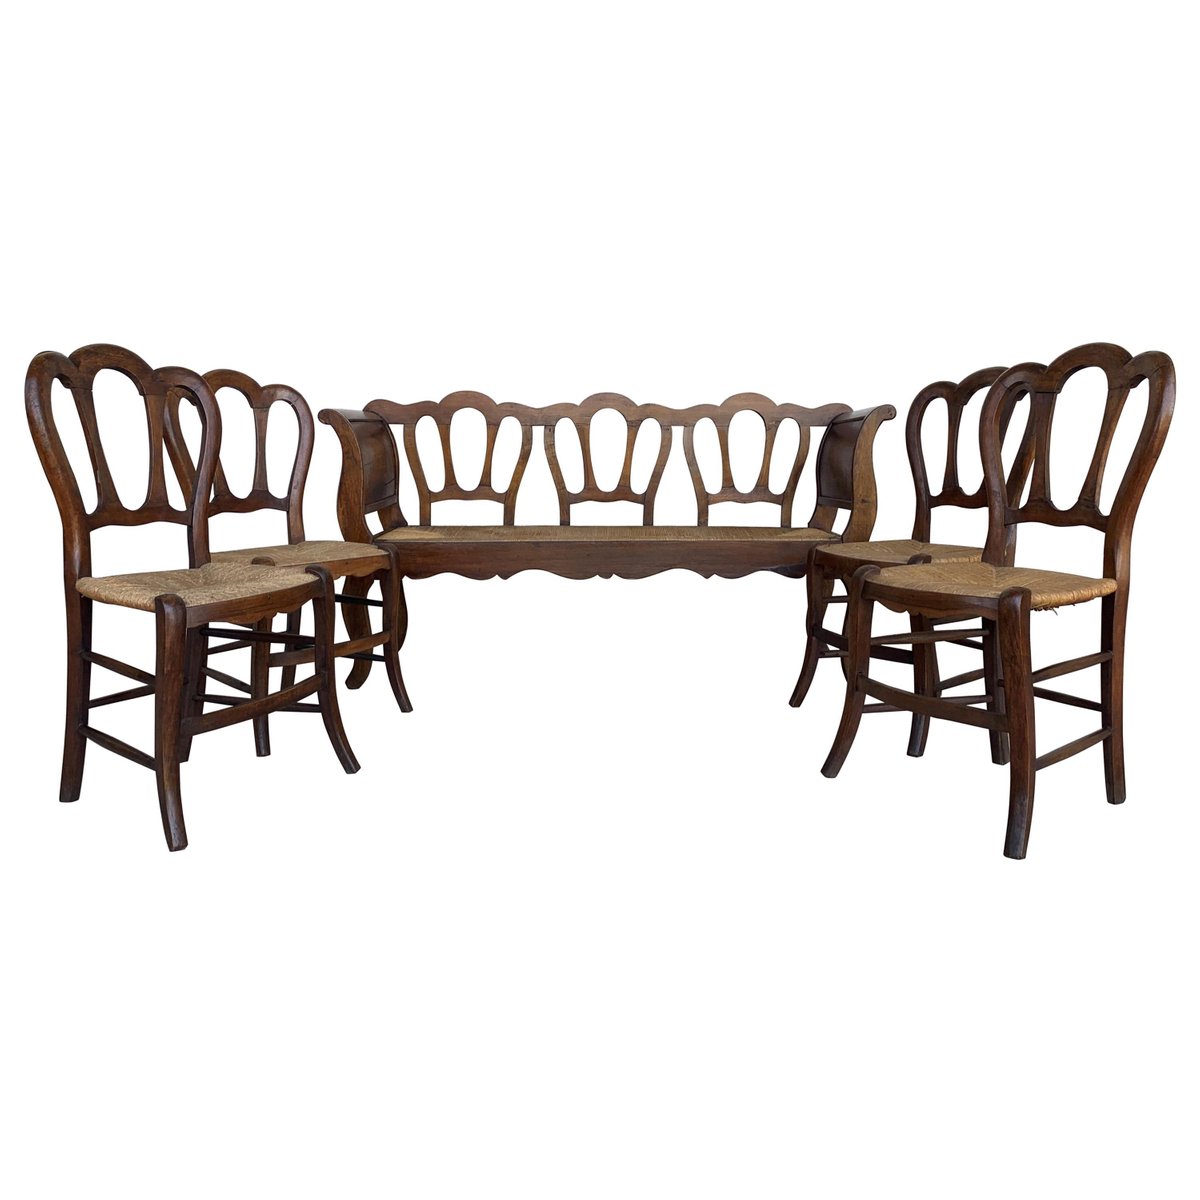 20th century bench victorian chairs in wood and rattan set of 5 PSK-1002912